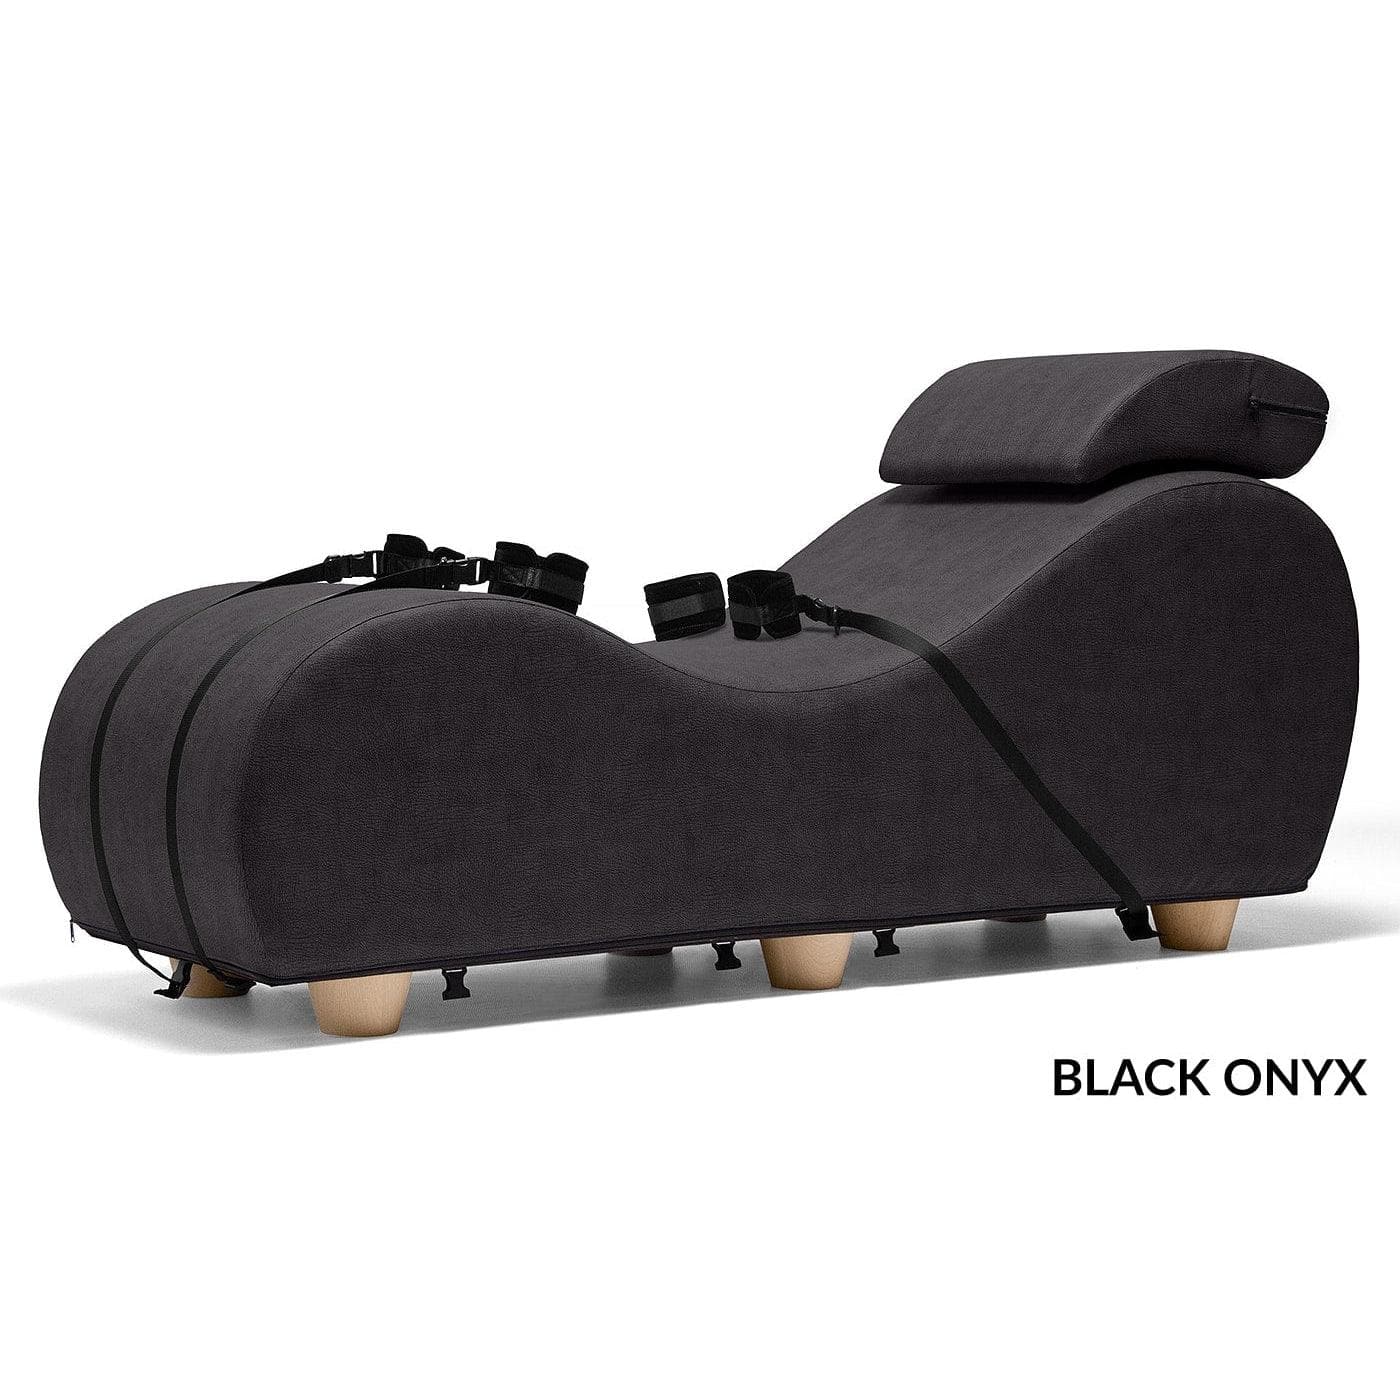 Liberator Black Label Esse Chaise II Elevated Couples Sex Position Lounger with Feet - Romantic Blessings